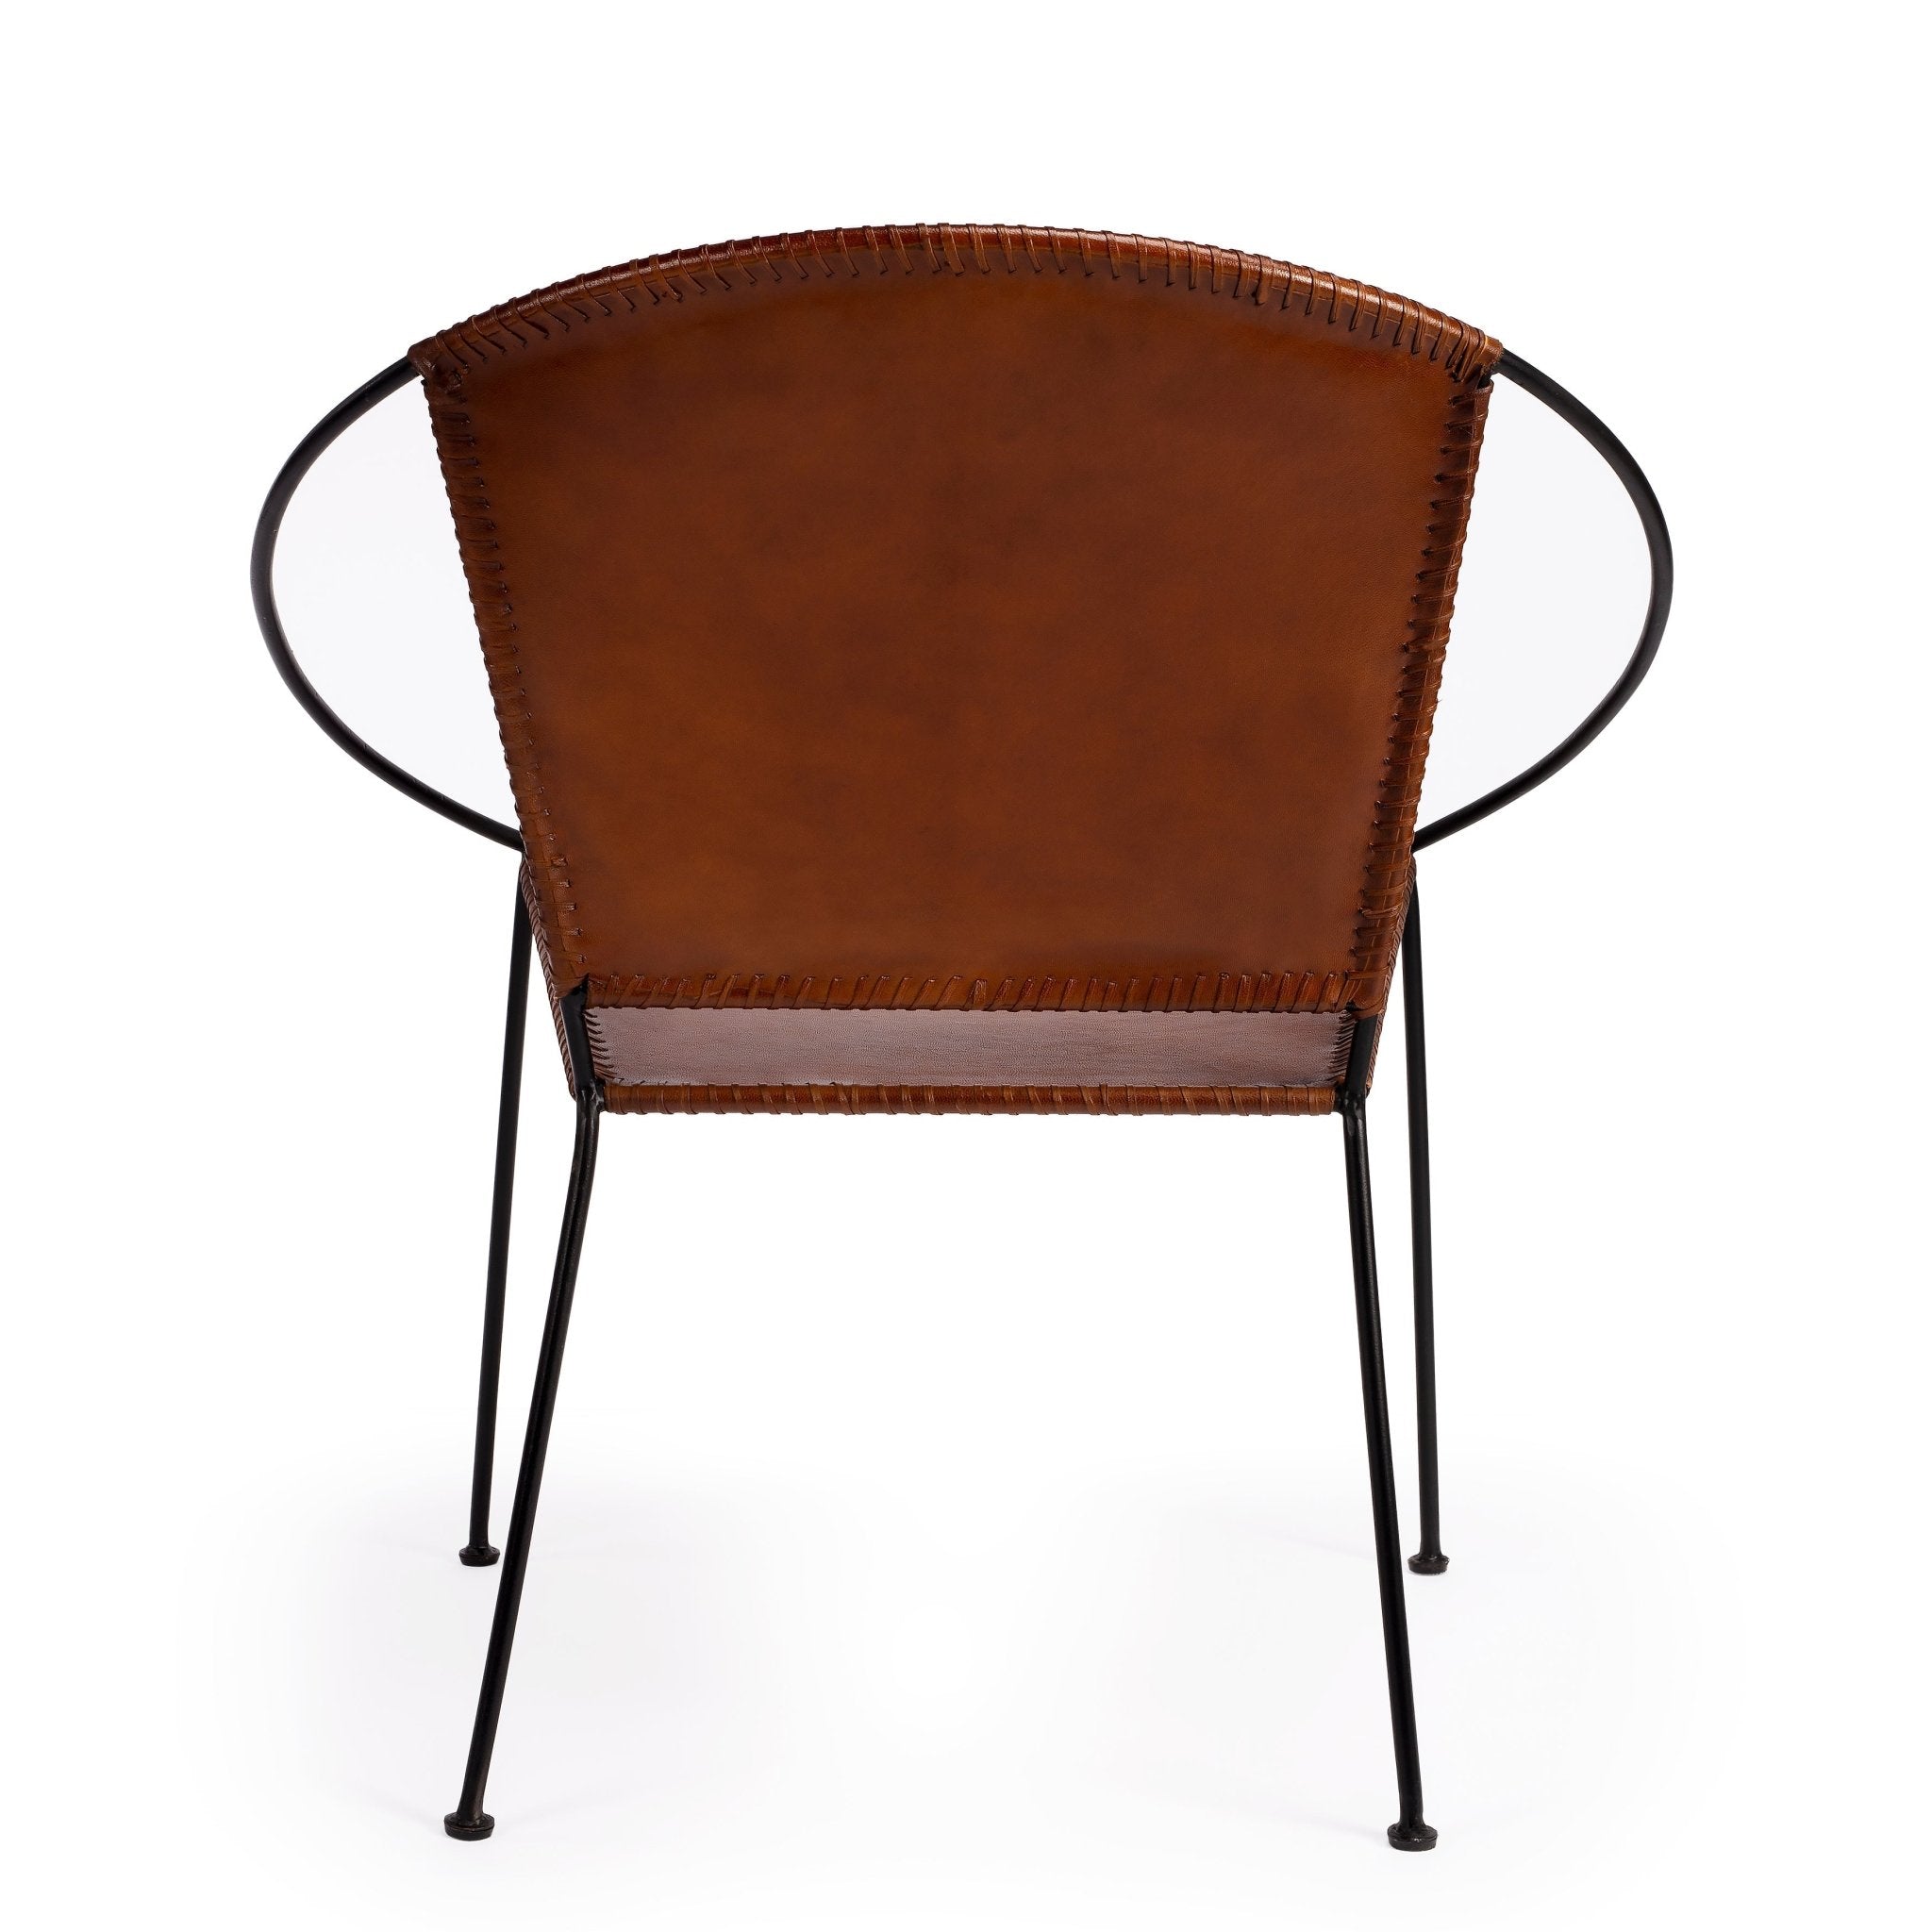 Milo Accent Chair - Brown Leather - - Furniture - Tipplergoods